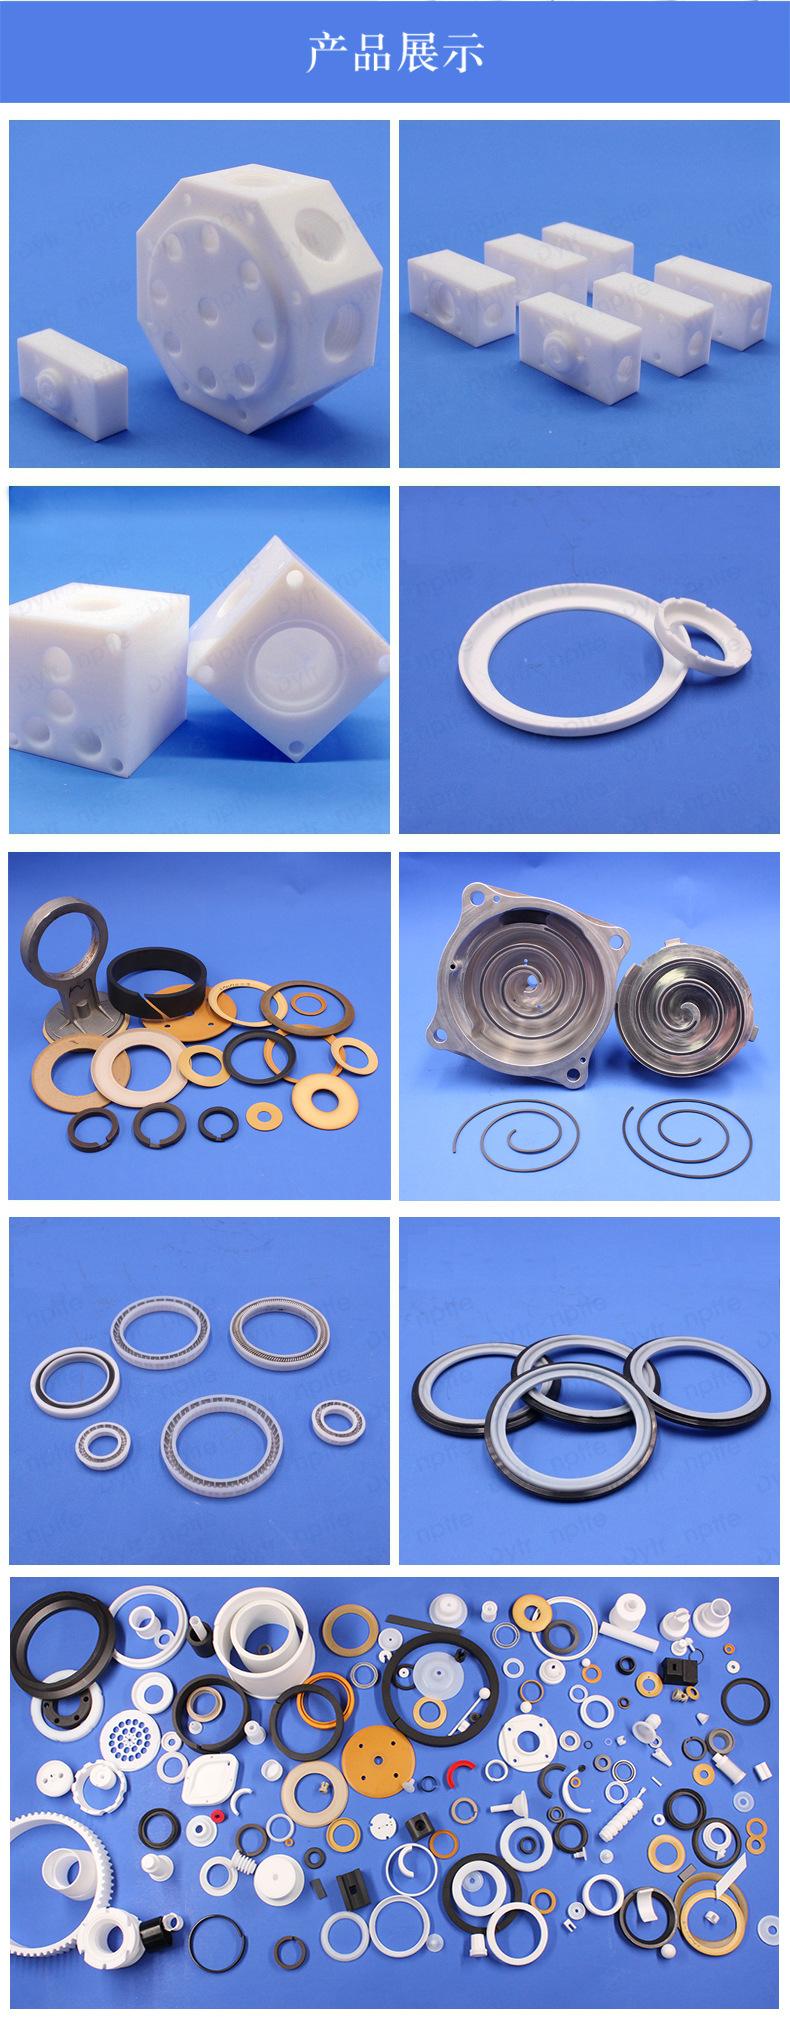 Dechuang PEM electrolytic cell gasket hydrogen production machine equipment accessories PTFE flat gasket with good insulation and waterproof performance